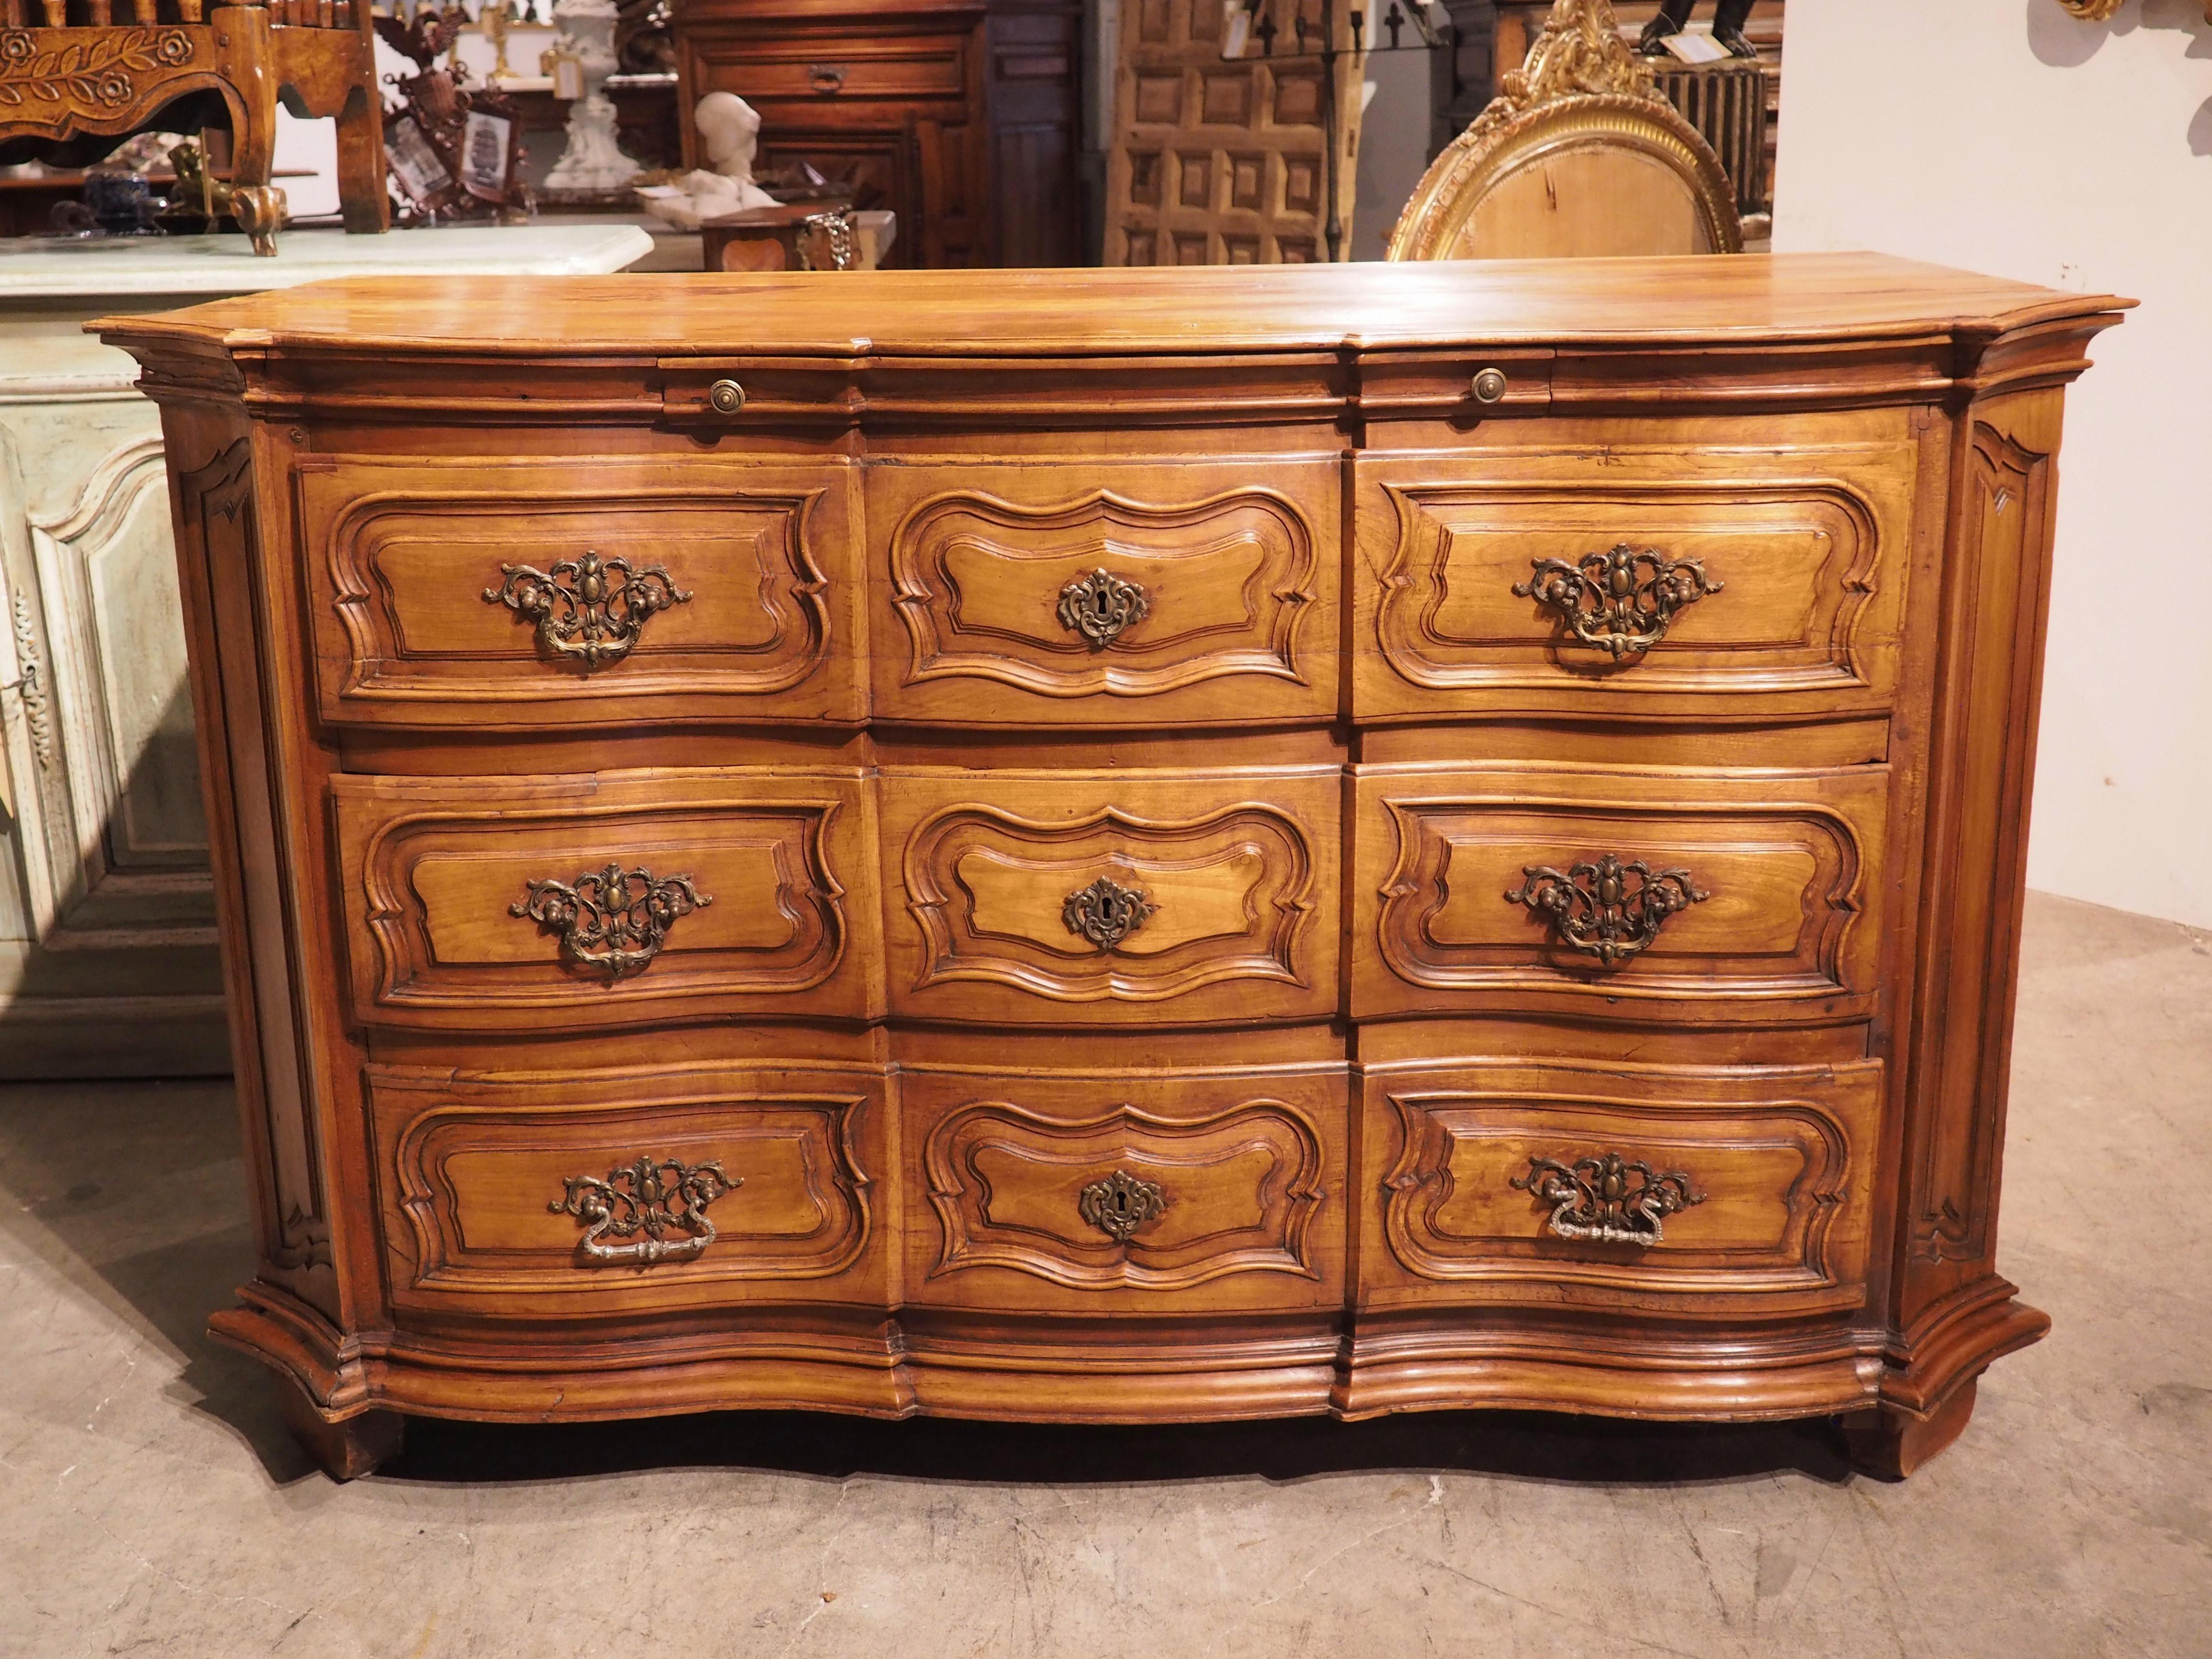 Louis XIV Cherrywood Commode from France, Early 18th Century For Sale 11